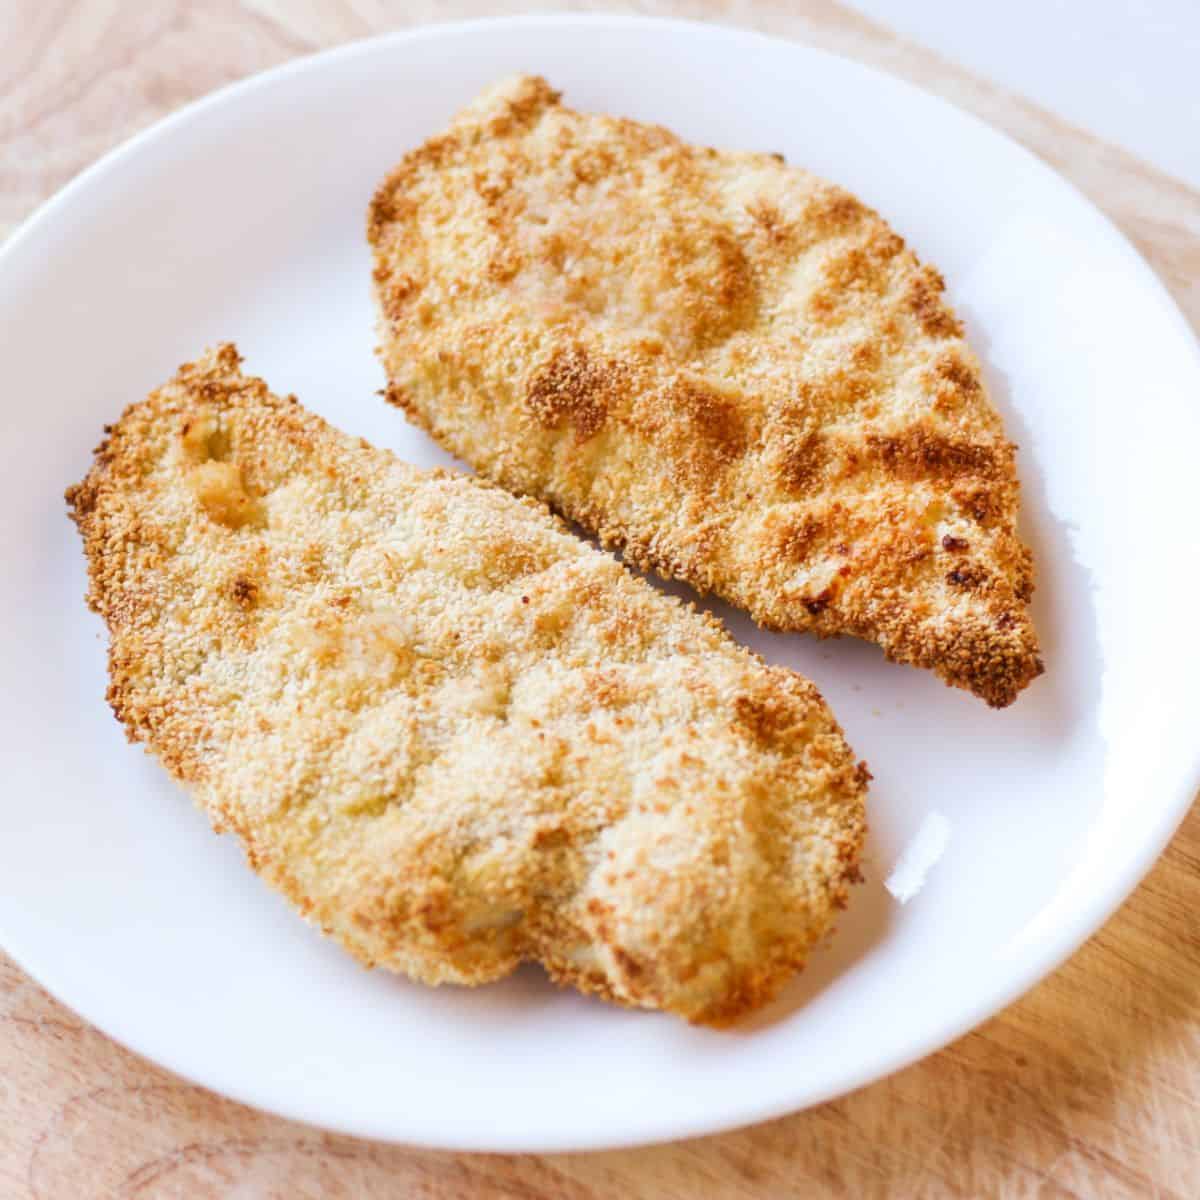 Two air fryer breaded chicken cutlets on a white plate on a wooden counter.